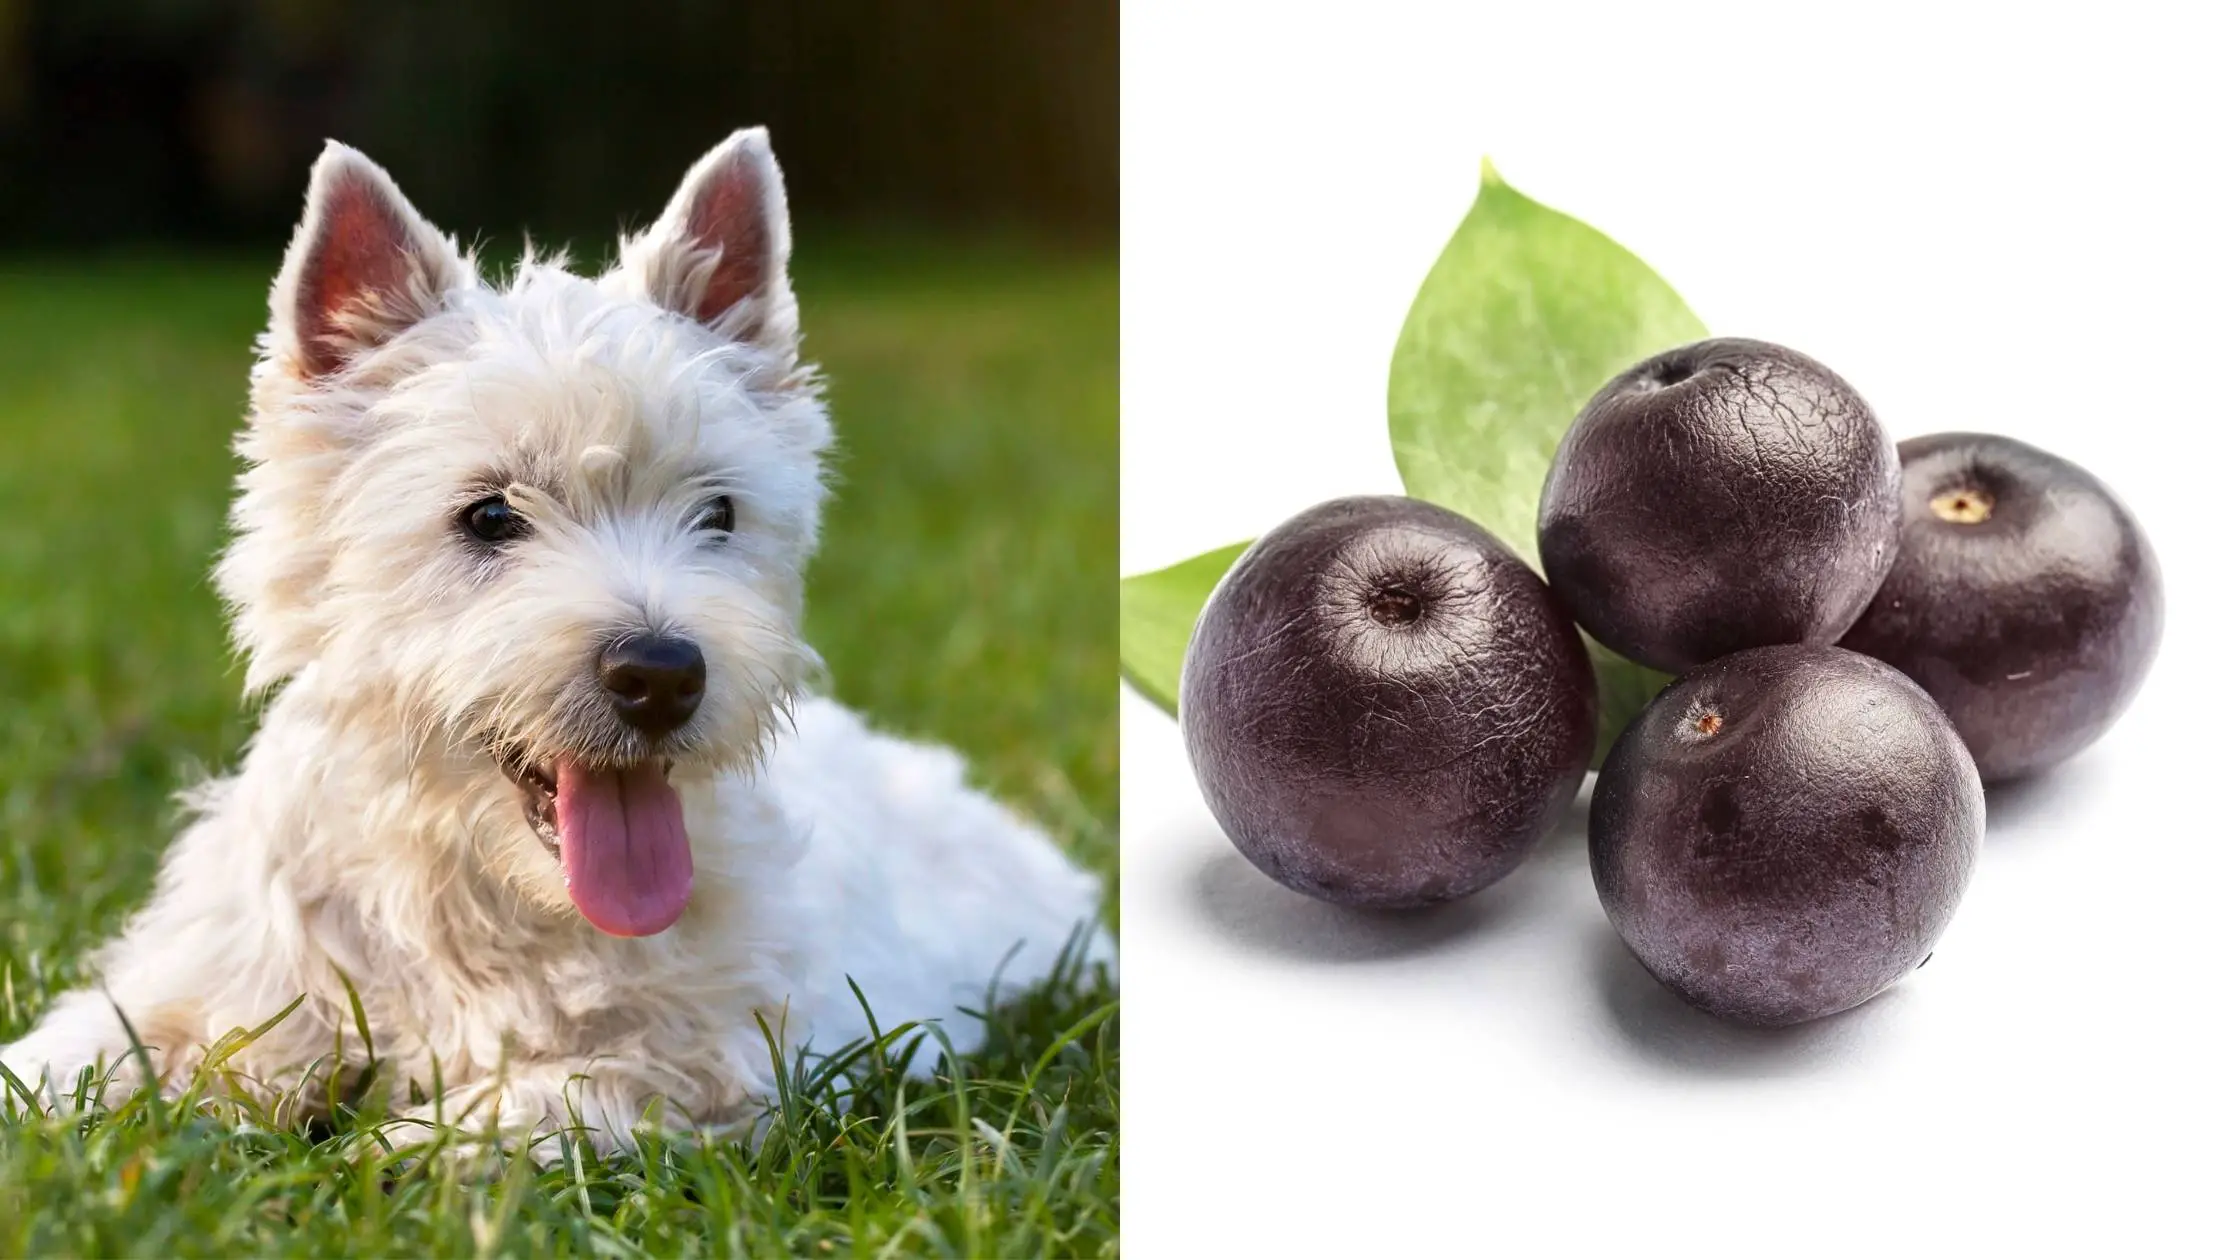 can dogs eat acai